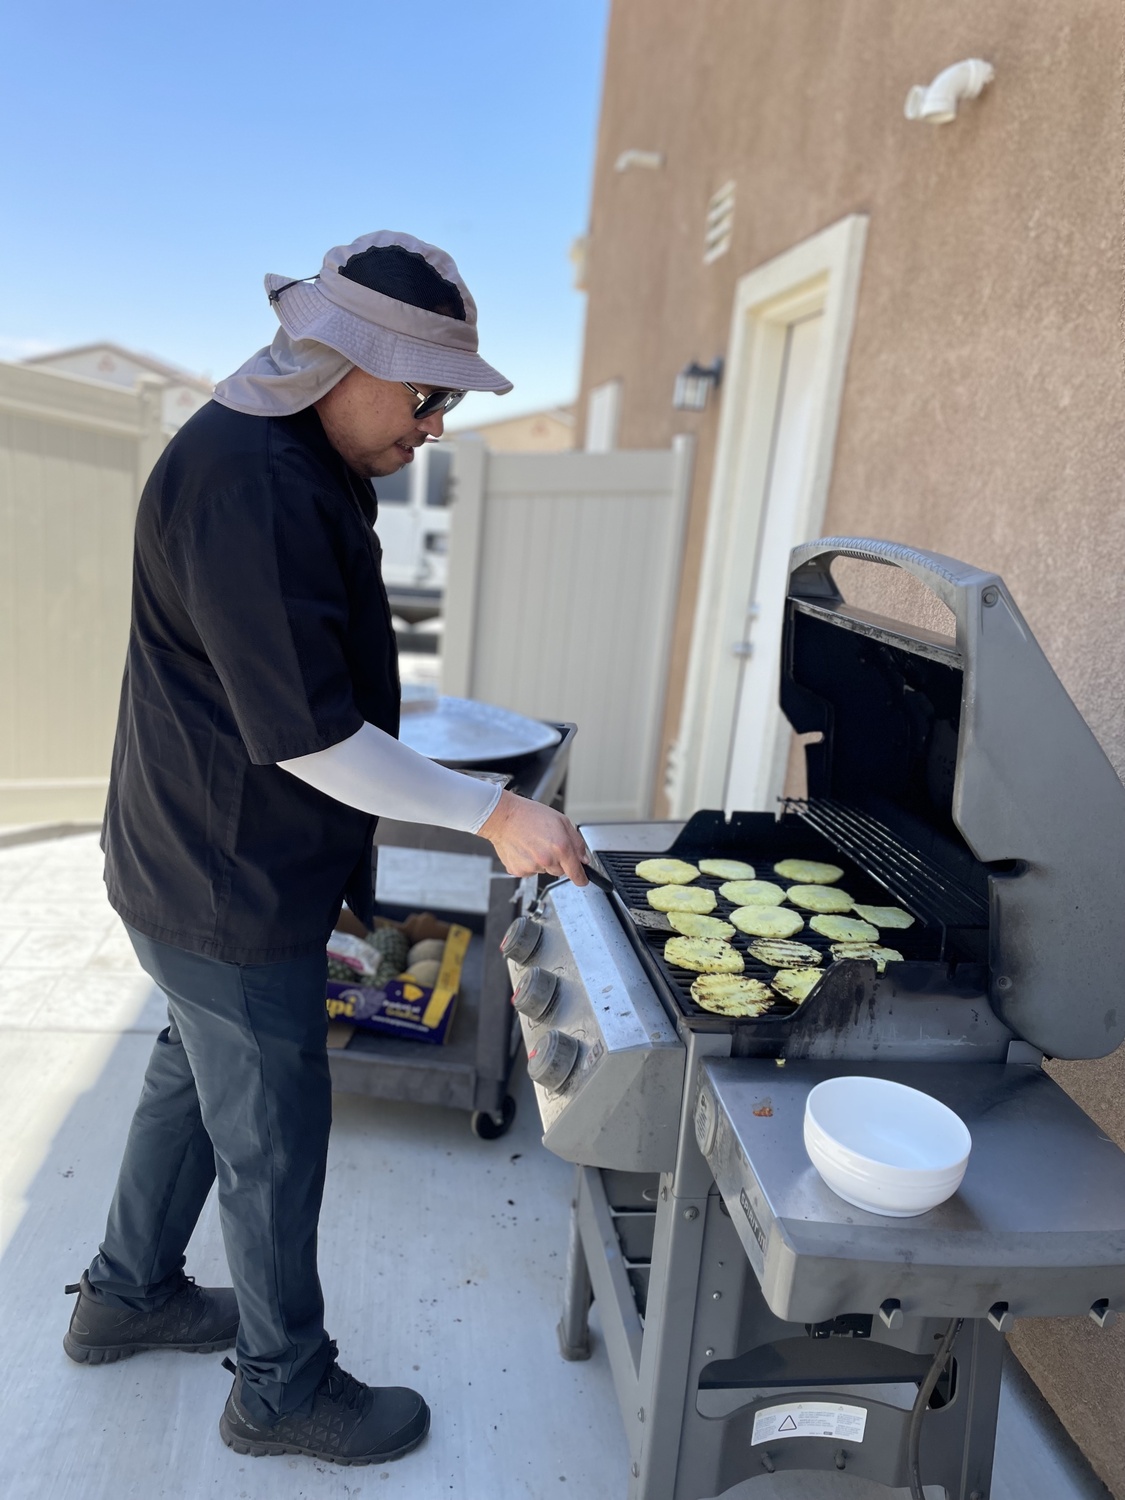 On-site Grilling and Cooking&nbsp;